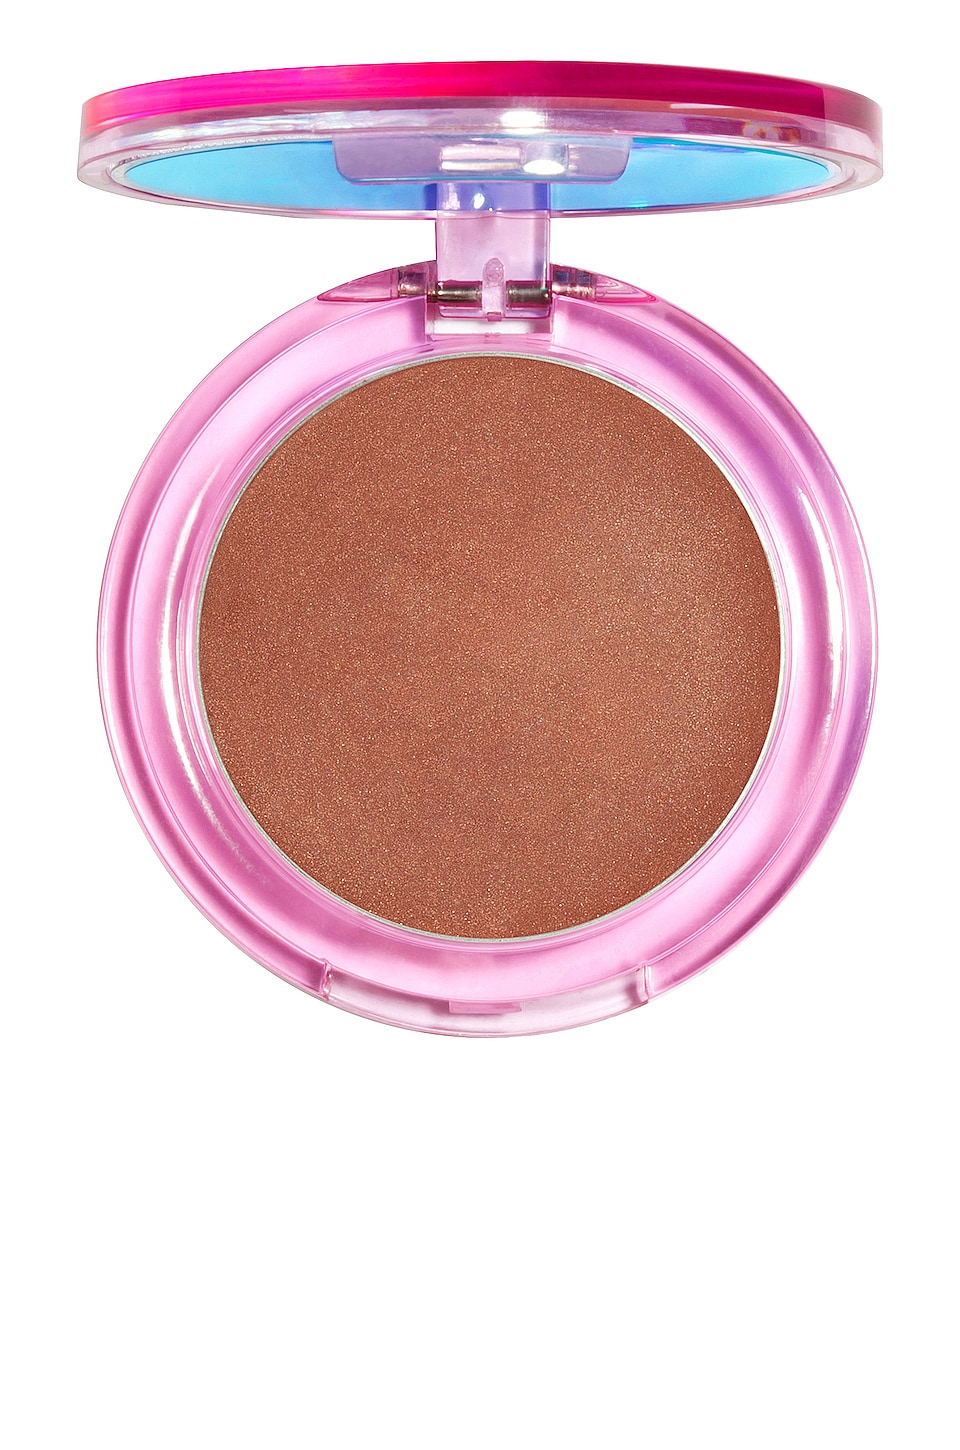 Lime Crime Glow Softwear Blush In Download. - Editorialist